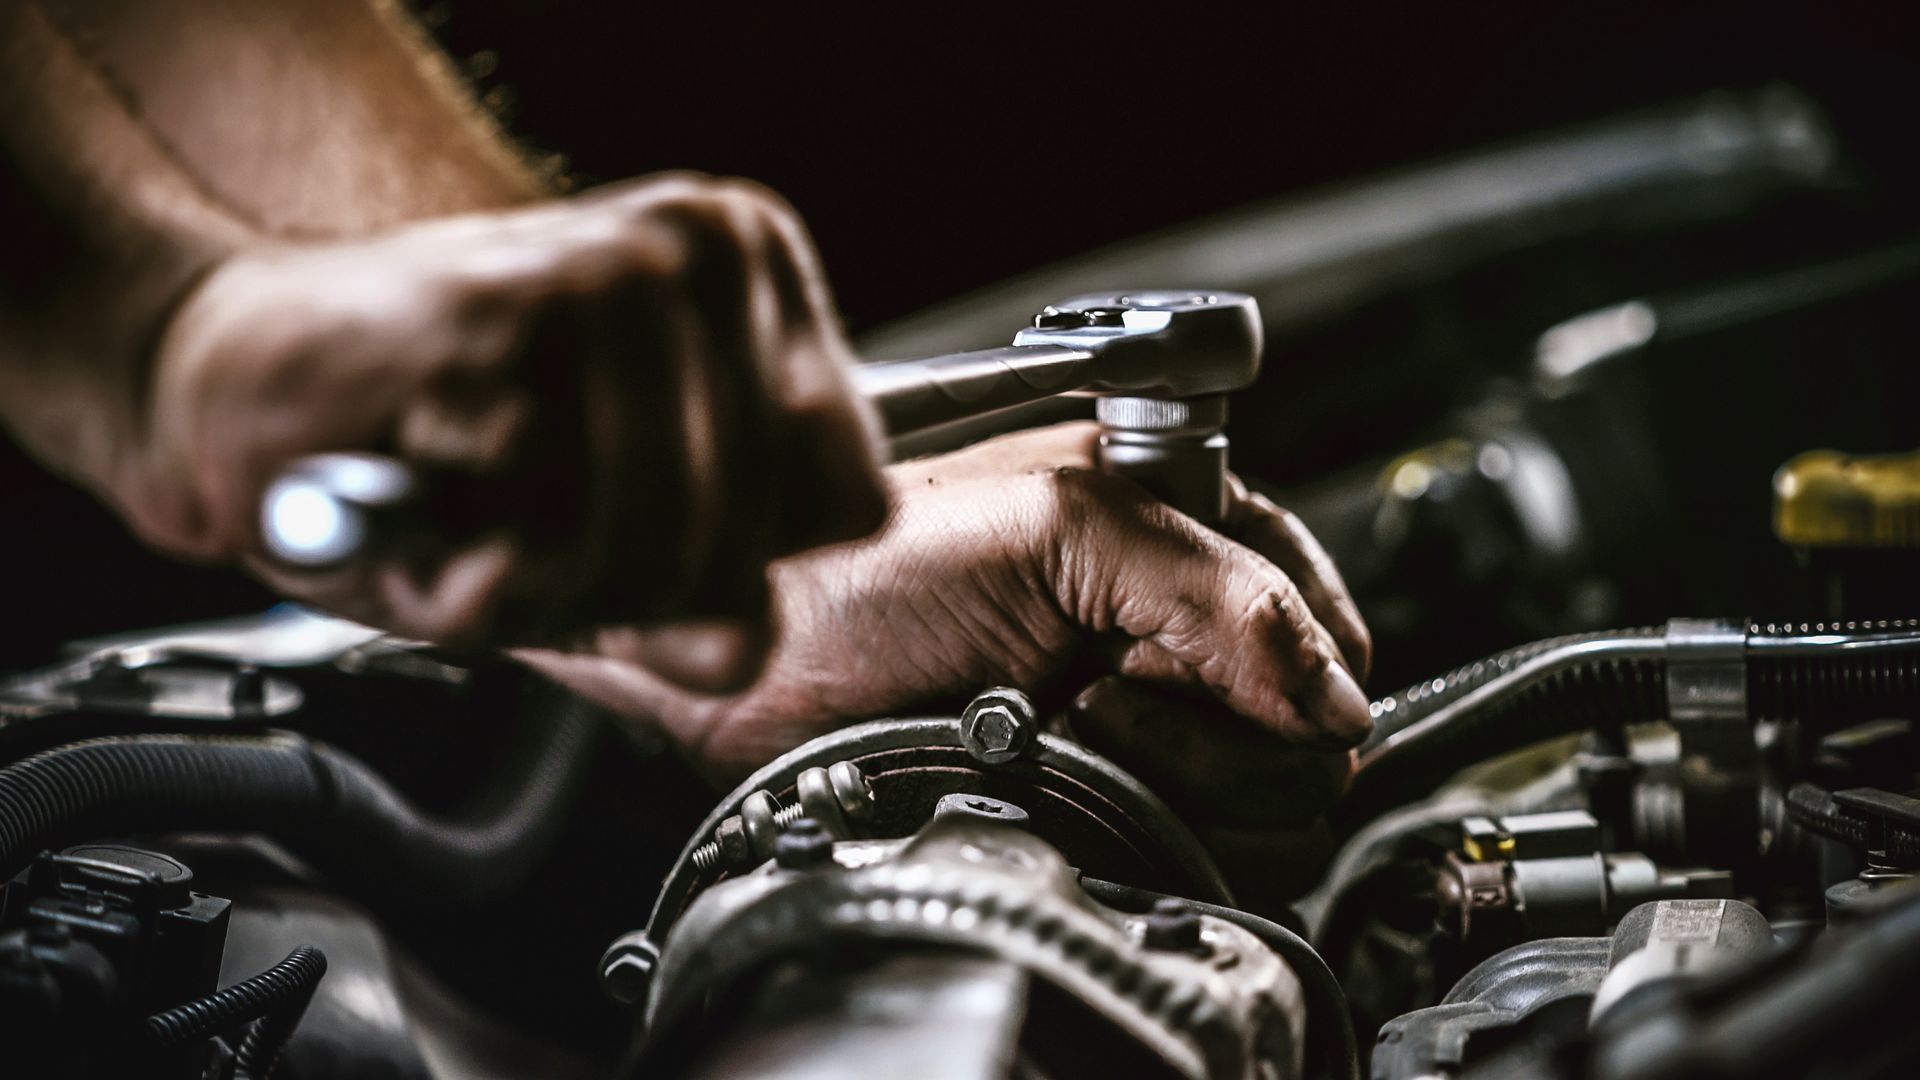 Engine Oil Change Services | Beer's Automotive Services and Repair